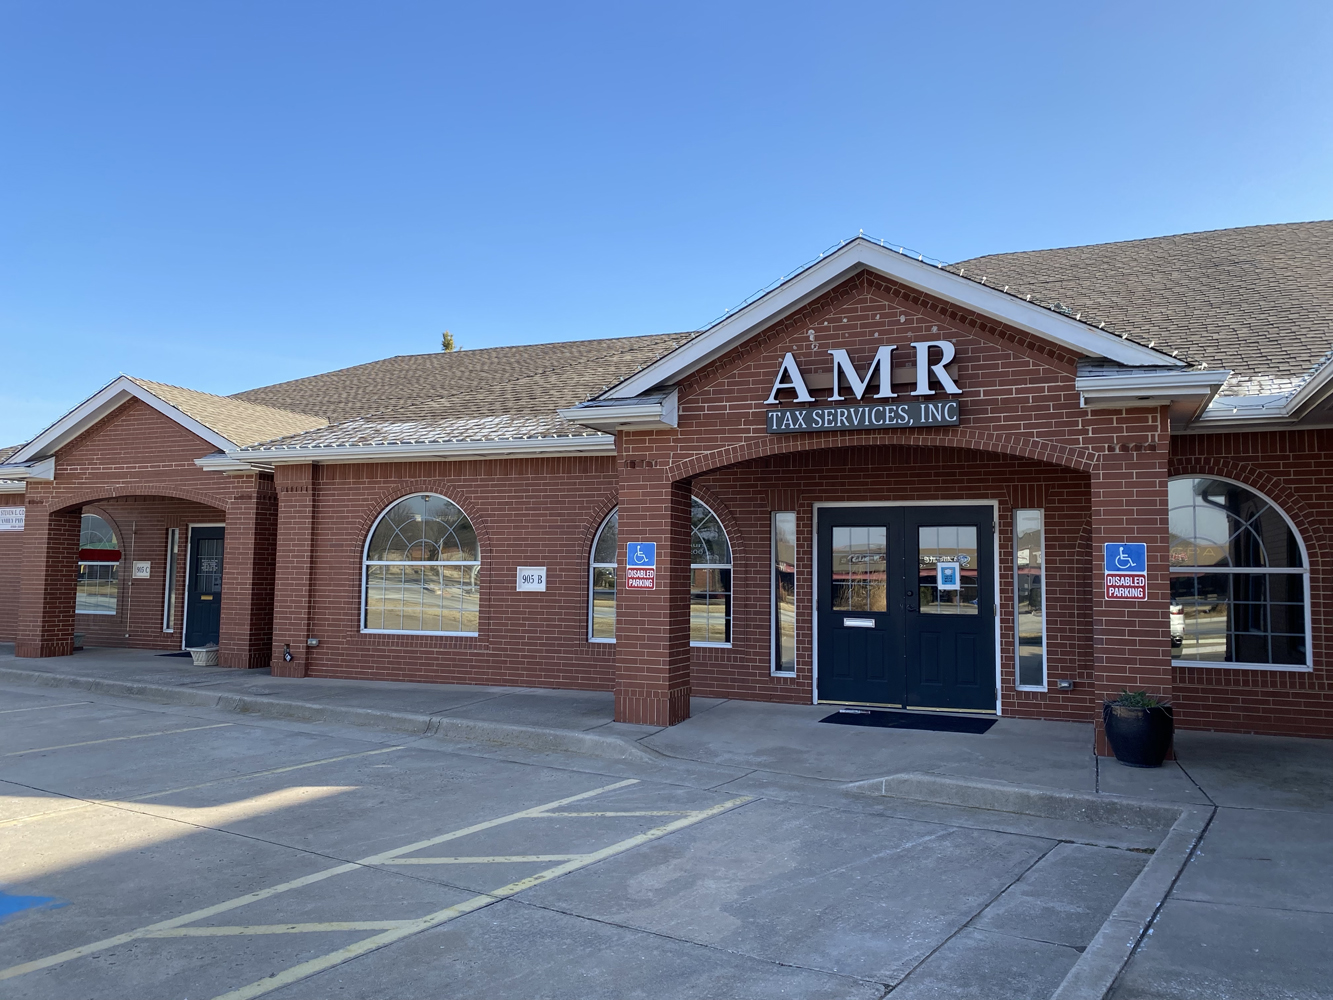 AMR Tax Services, Inc